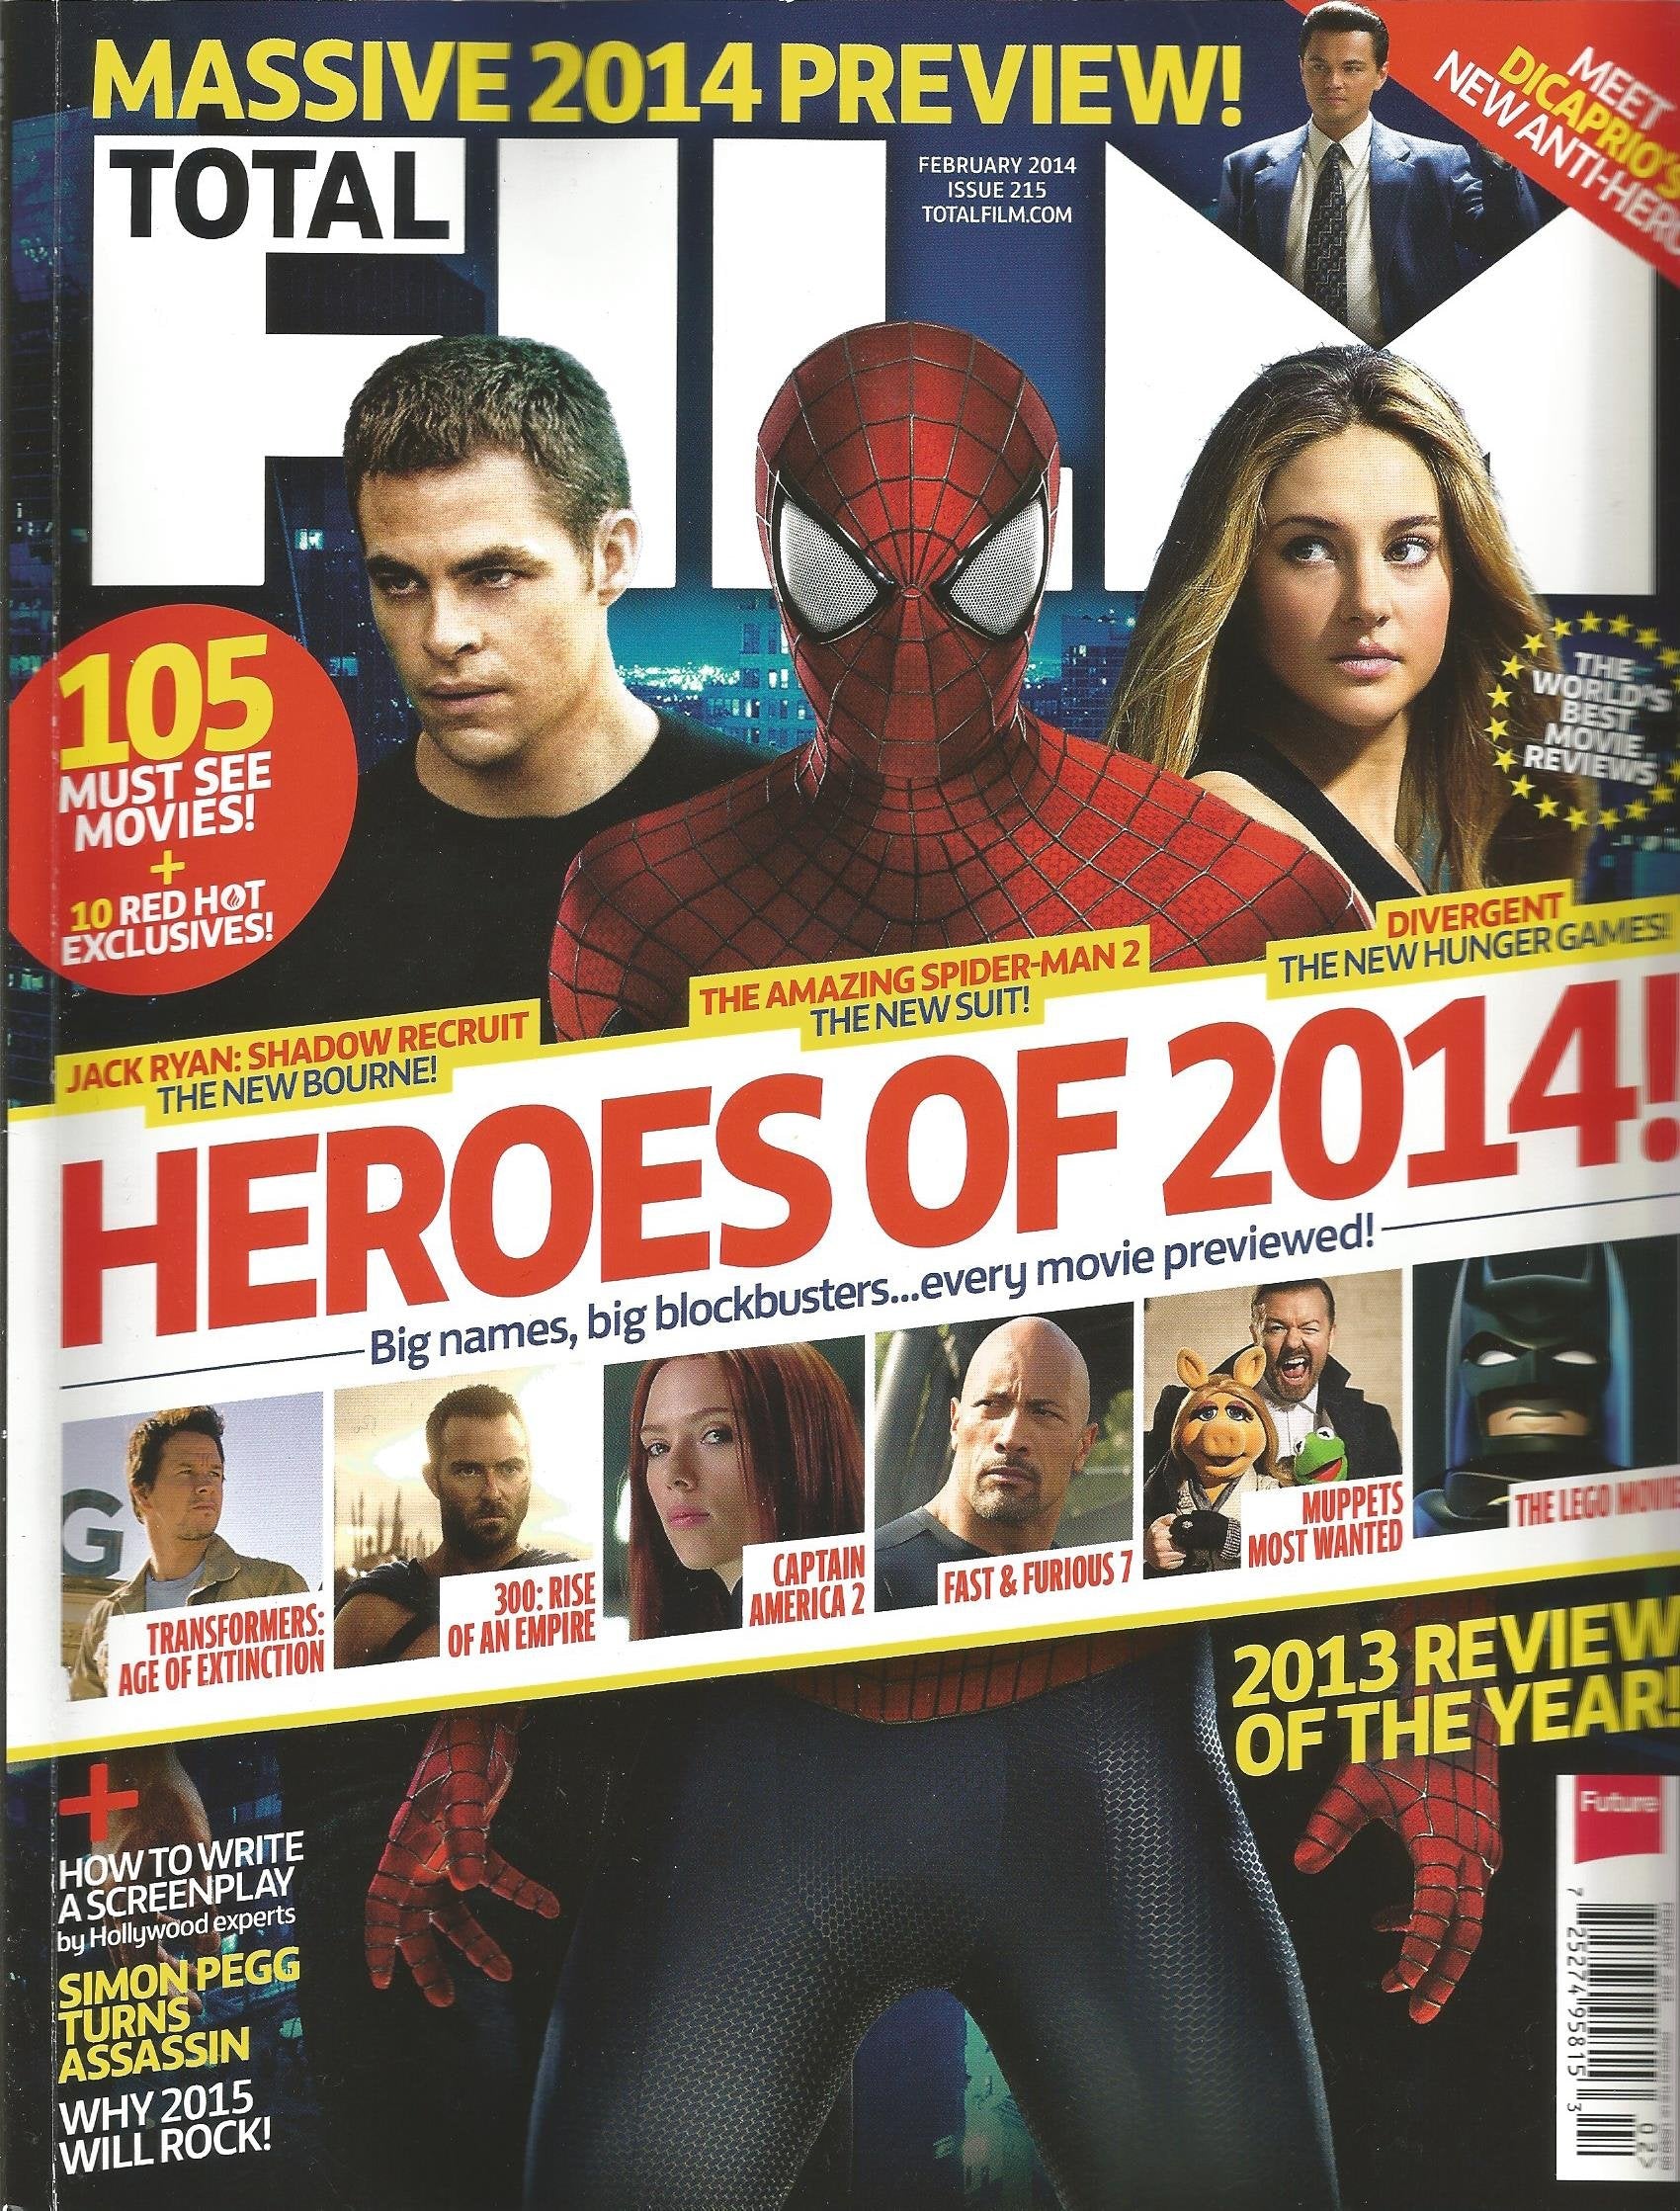 Total Film Issue 215 (February 2014) Heroes of 2014!